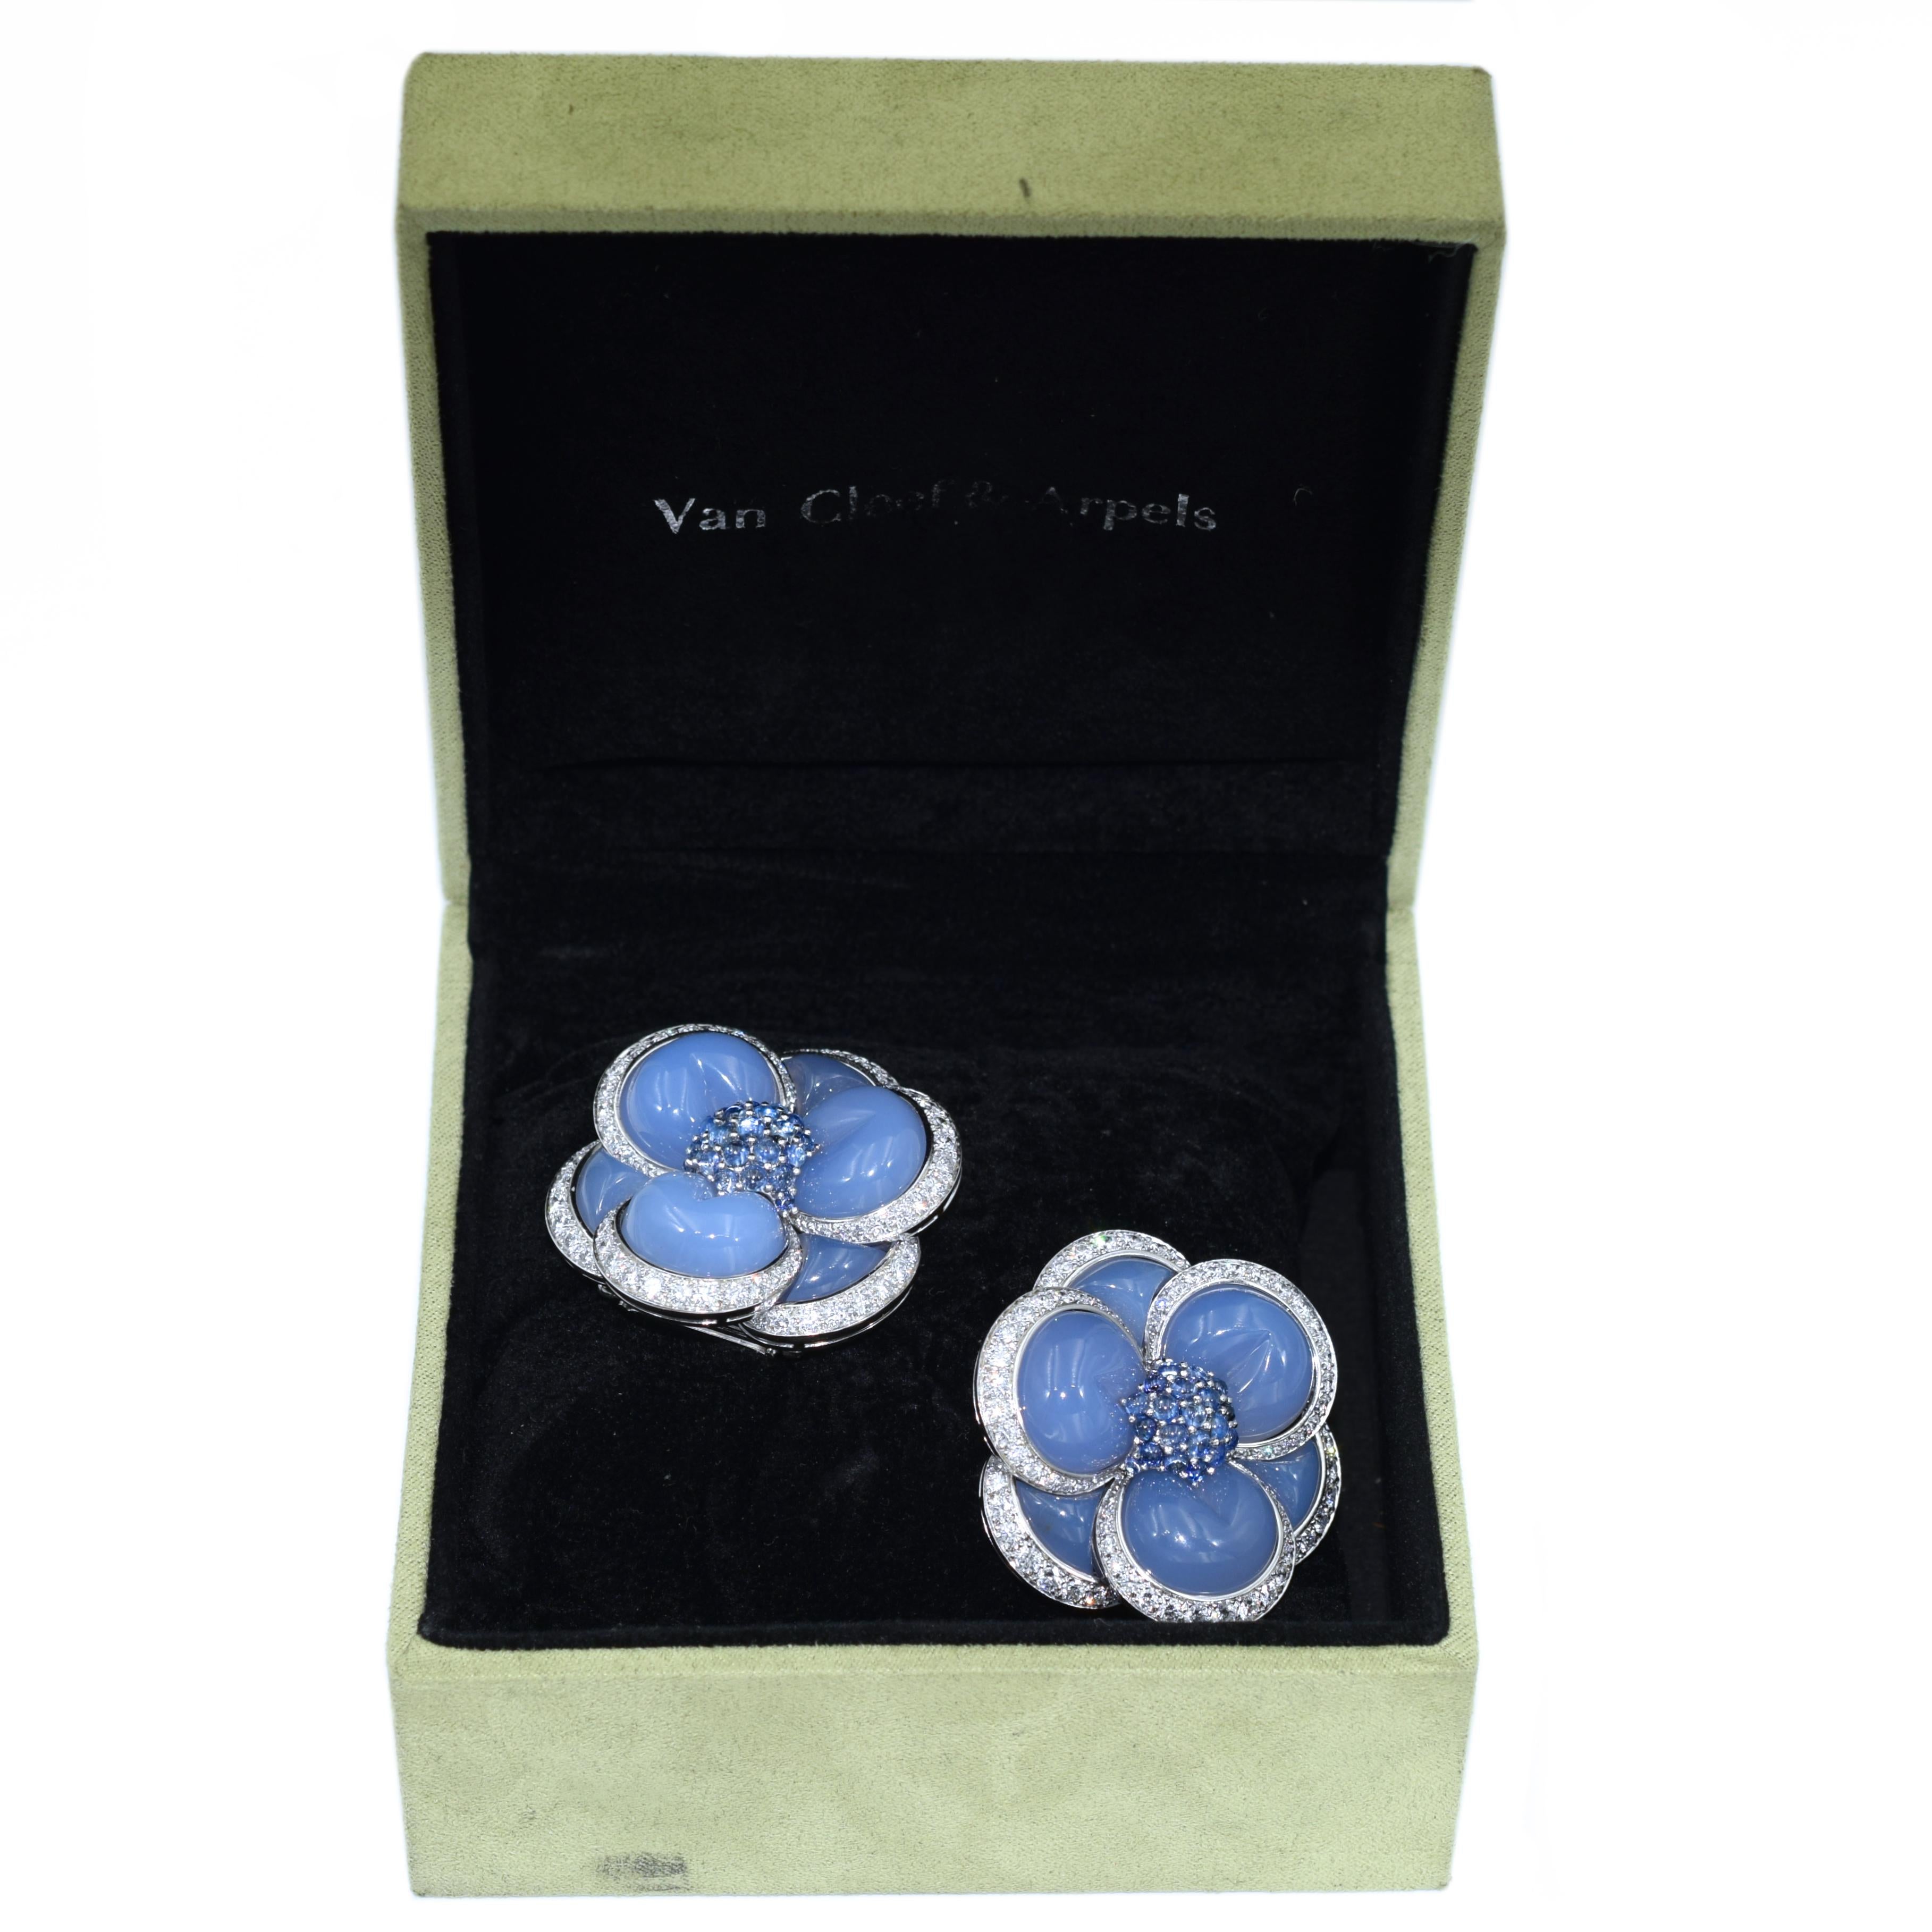 Pair of VCA chalcedony, sapphire and diamond 'Blue Gardenia' clip brooches. The brooches feature
chalcedony petals with edges adorned by 144 round brilliant cut diamonds, weighing total of
approximately 3.50ct - 4.0ct, color F-G, clarity VVS-VS.